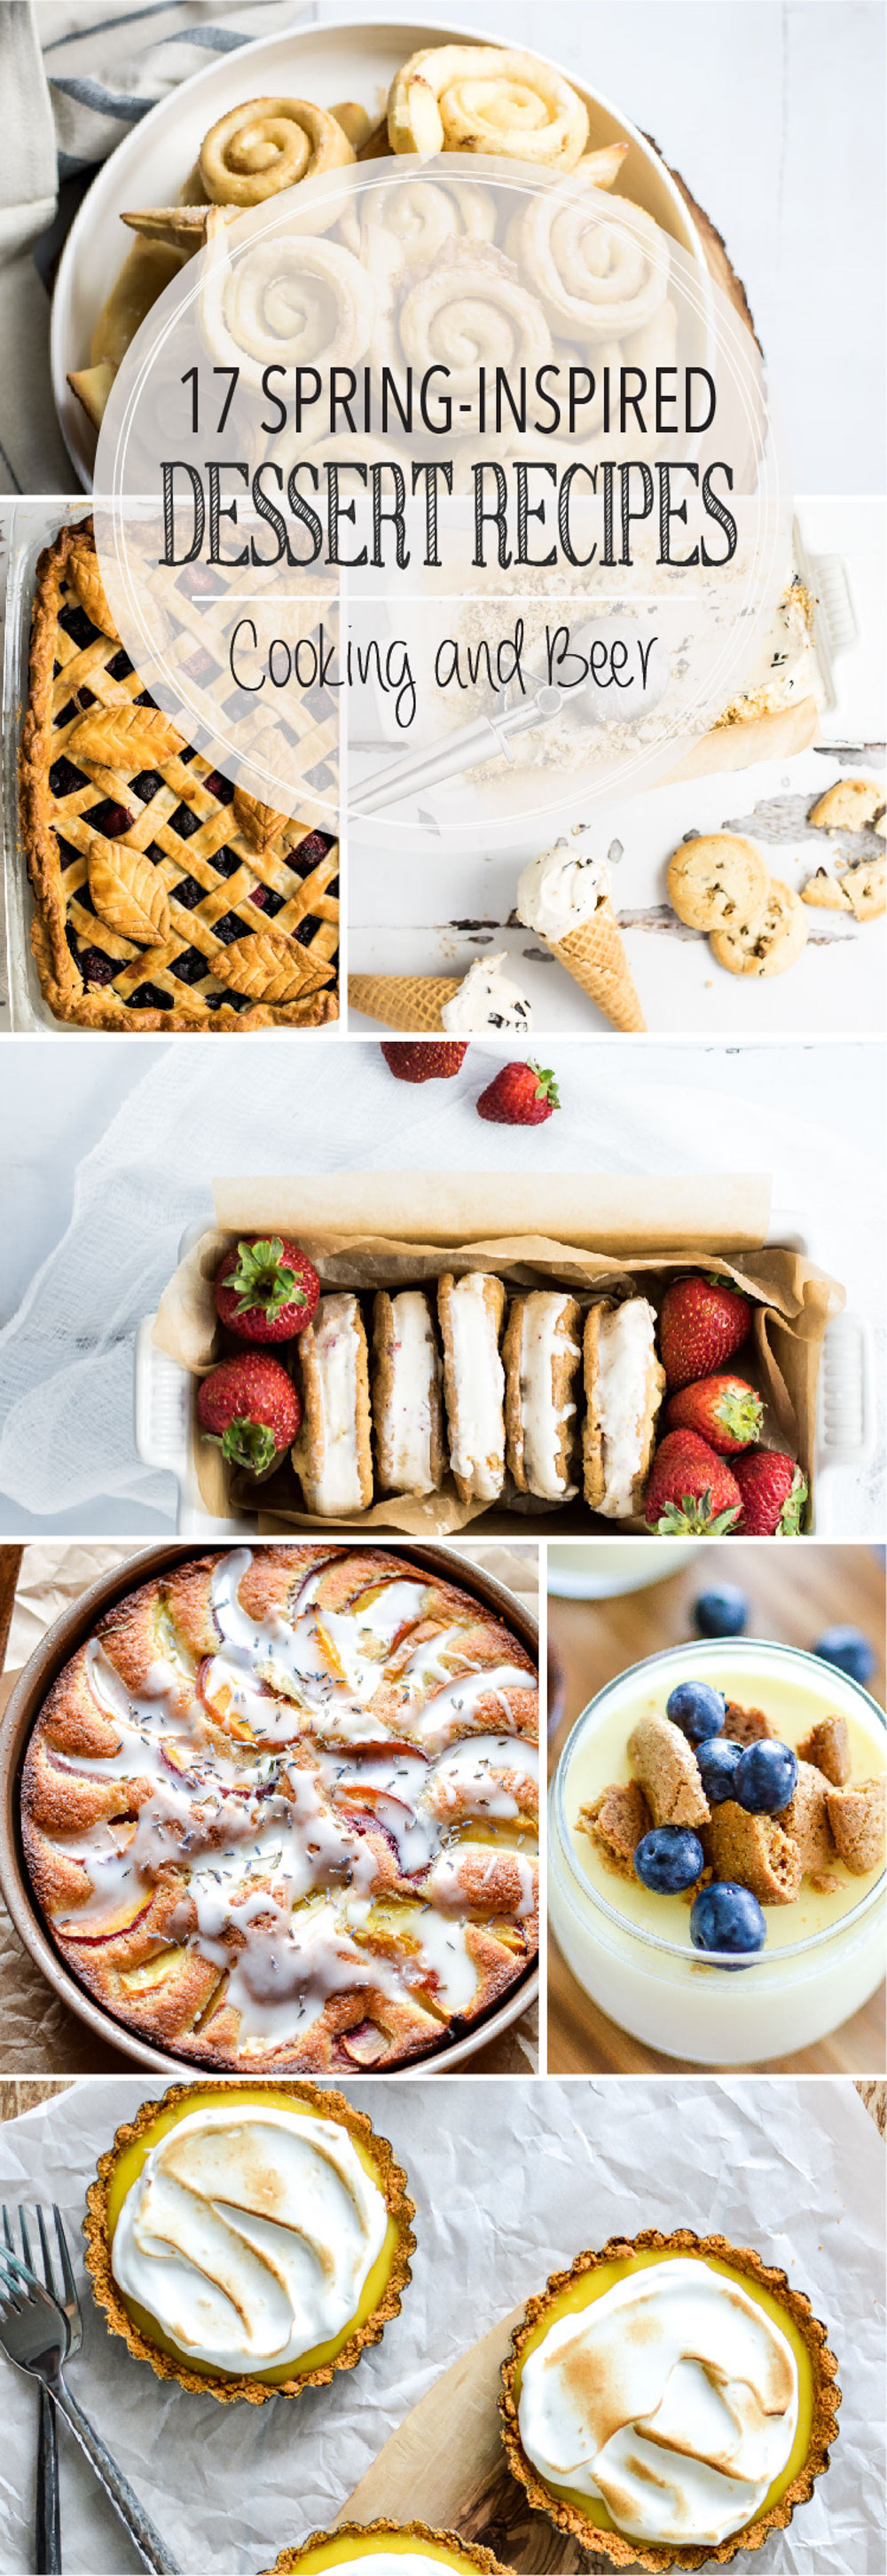 From strawberry crepes to vegan ice cream and from no-bake blueberry tarts to mini lemon pounds cakes, here are 17 spring-inspired dessert recipes!